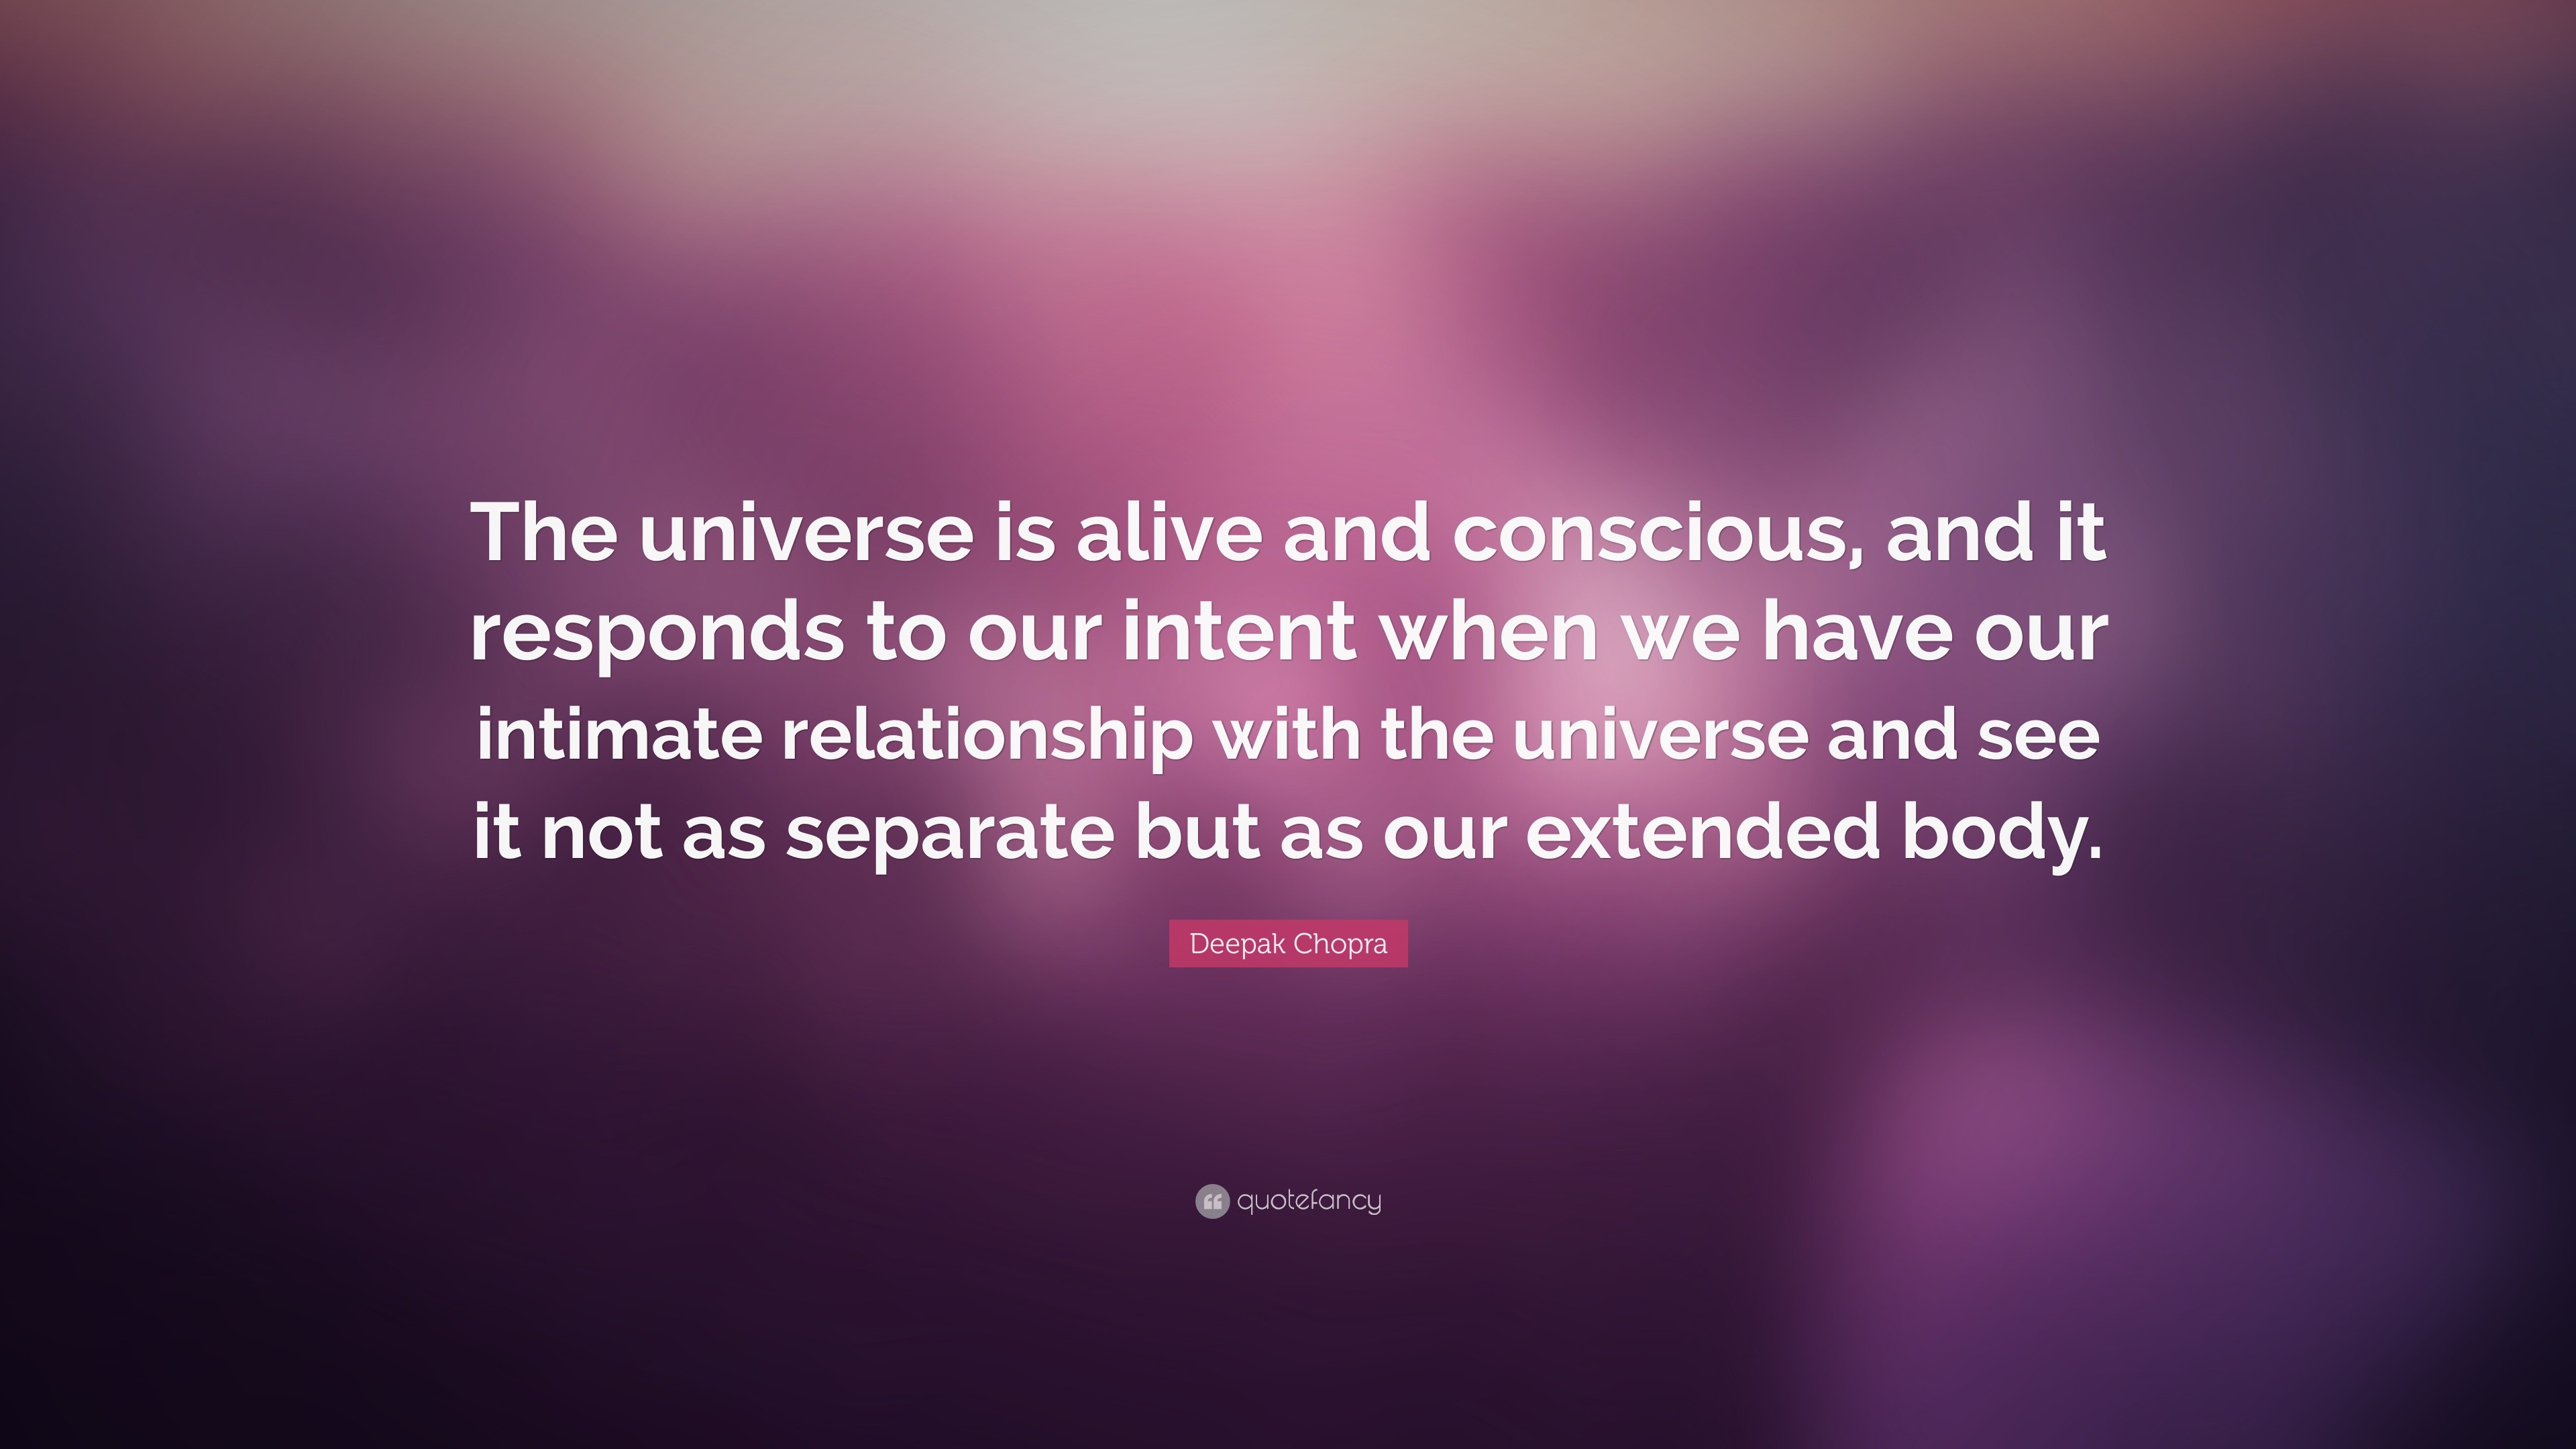 Deepak Chopra Quote: “The universe is alive and conscious, and it ...